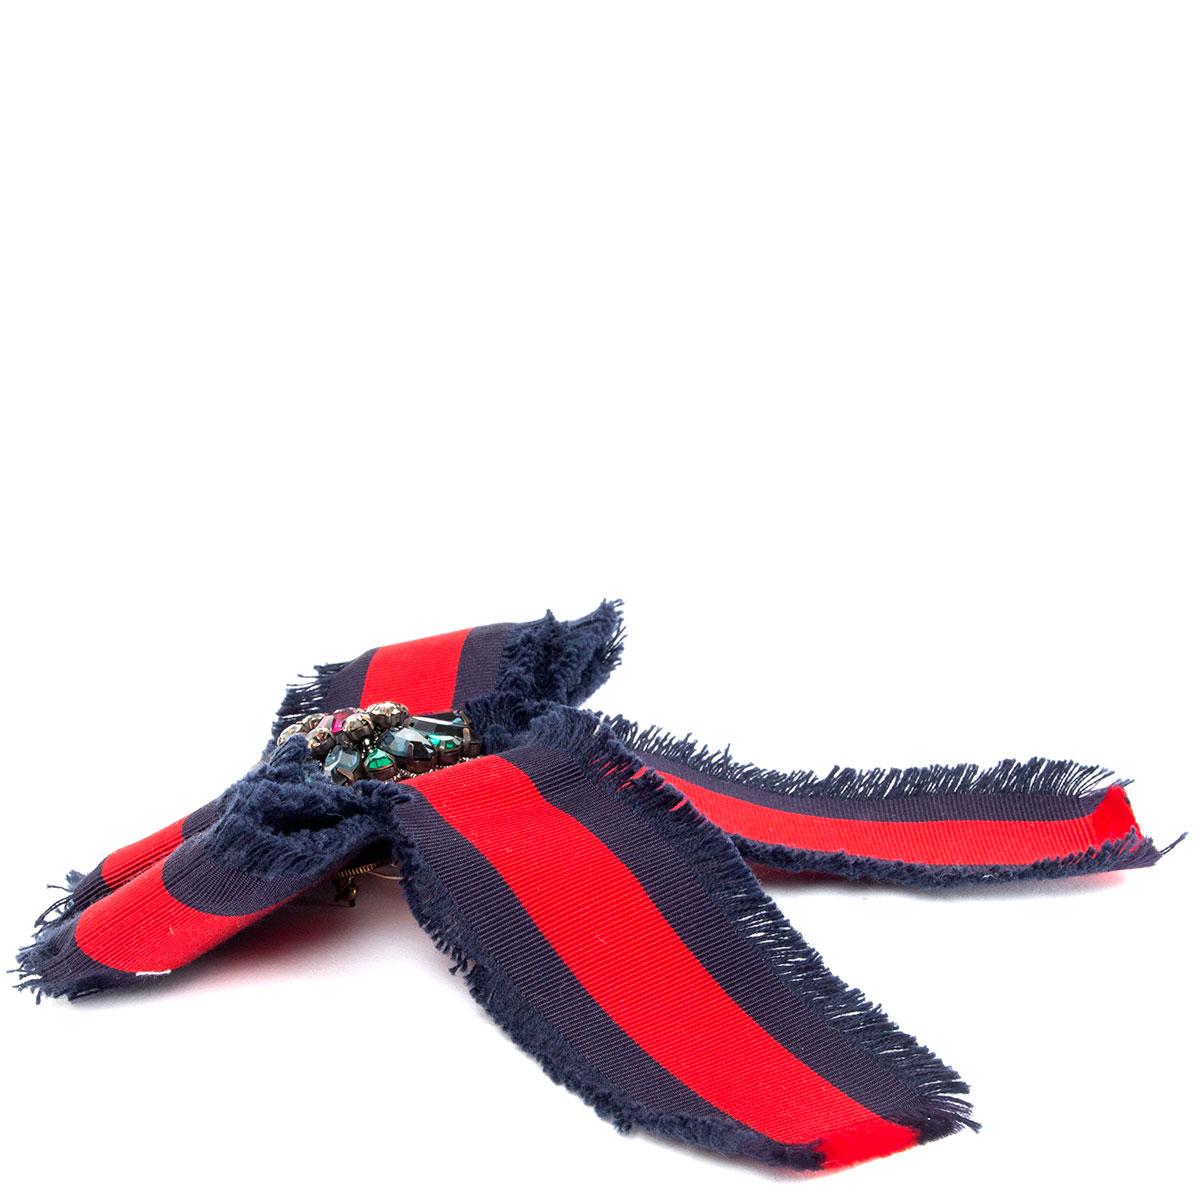 100% authentic Gucci Web bow brooch in classic red and navy grosgrain embellished with pink, blue, green and clear crystals. Has been worn and is in excellent condition. 

Measurements
Width	15cm (5.9in)
Length	15cm (5.9in)

All our listings include